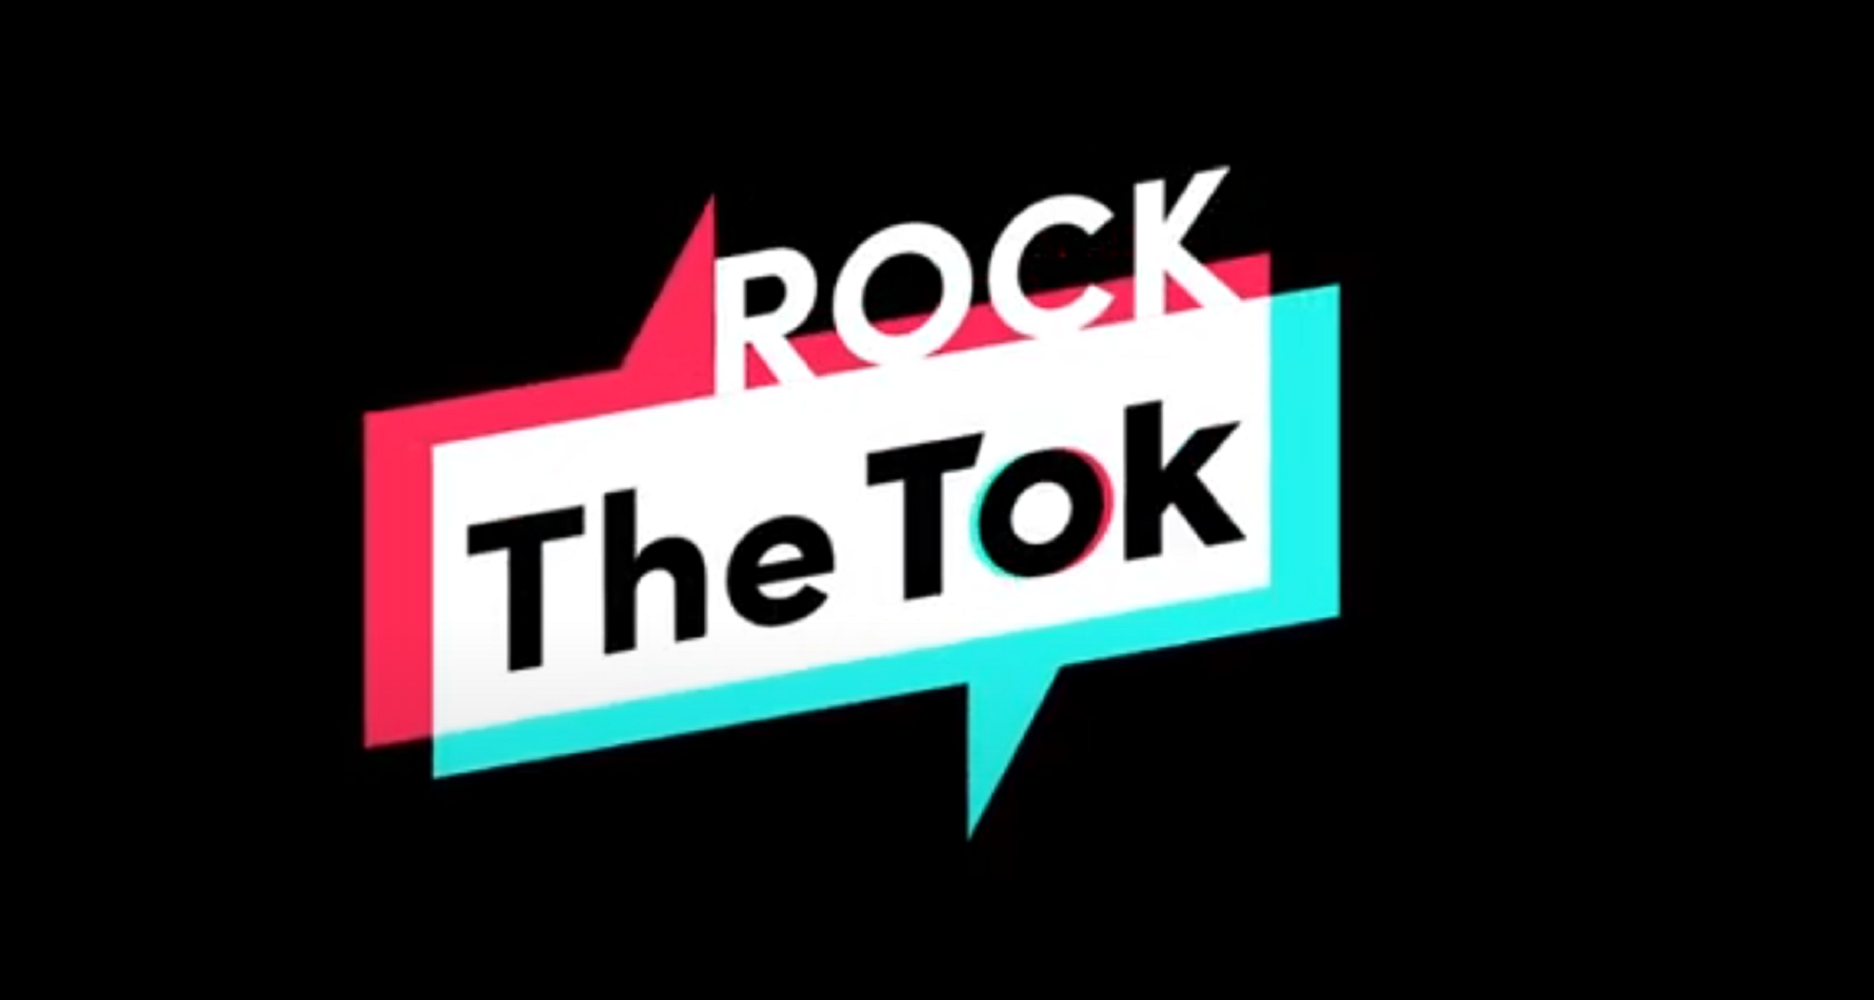 Which Agencies Rocked the Tok?